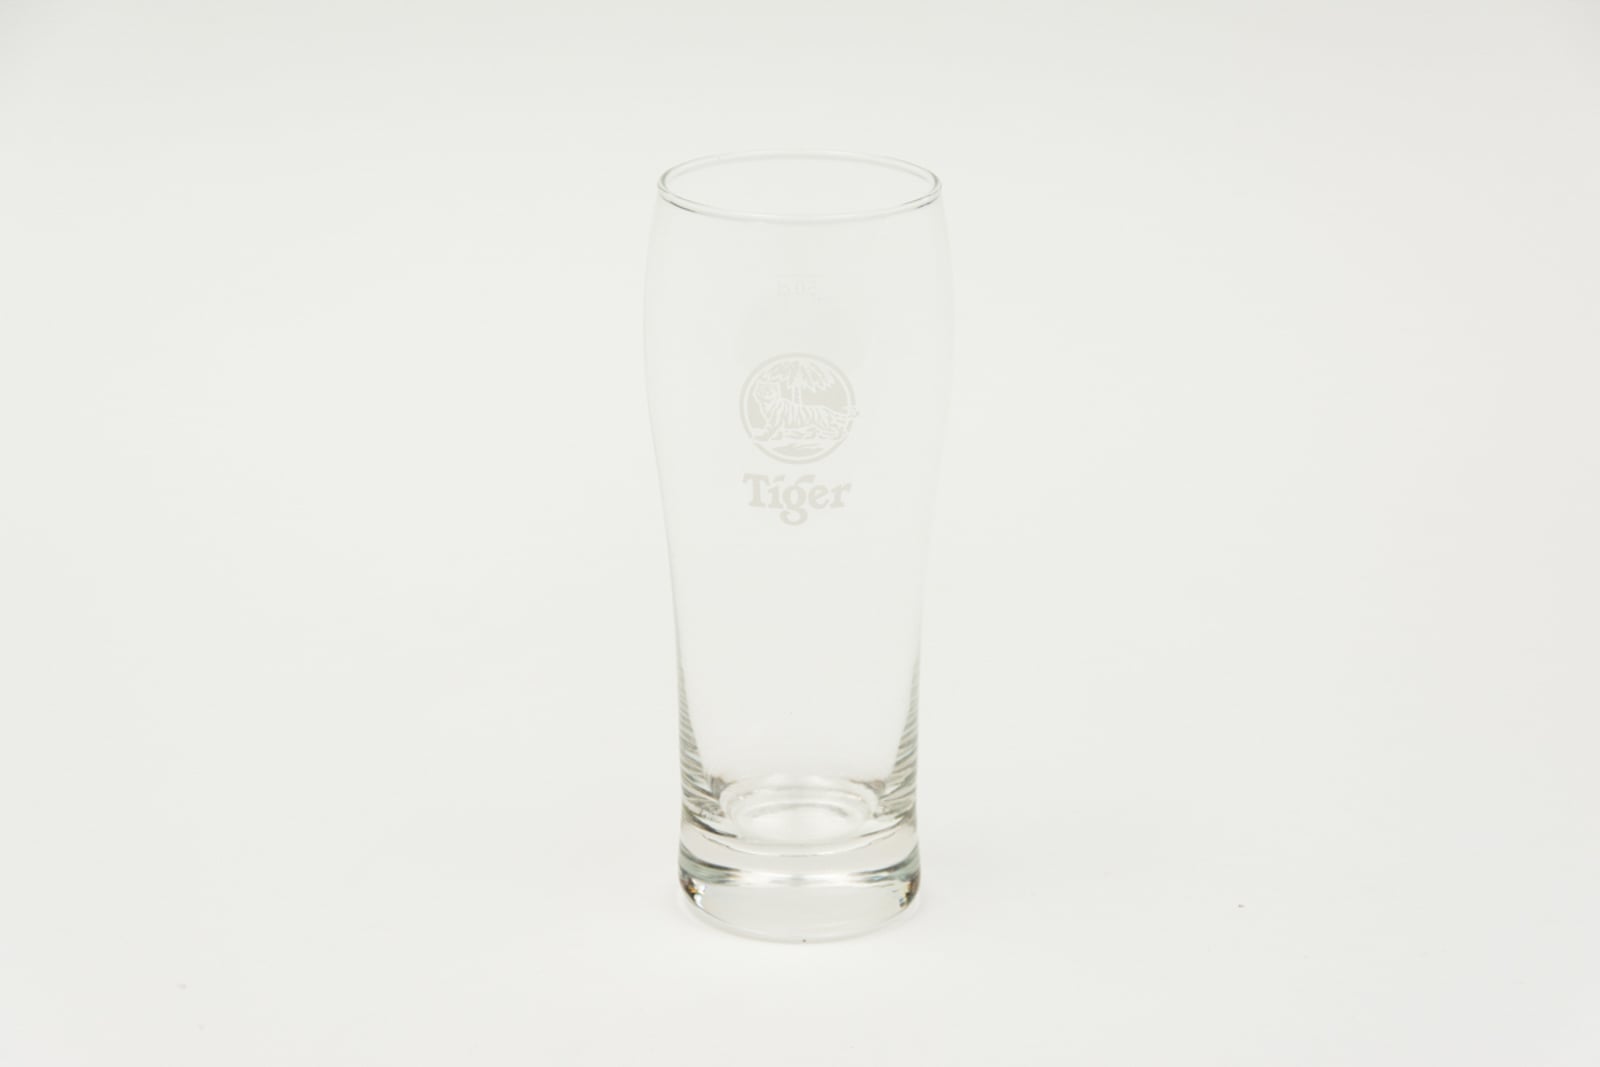 Tiger Imperial Pint Glassware